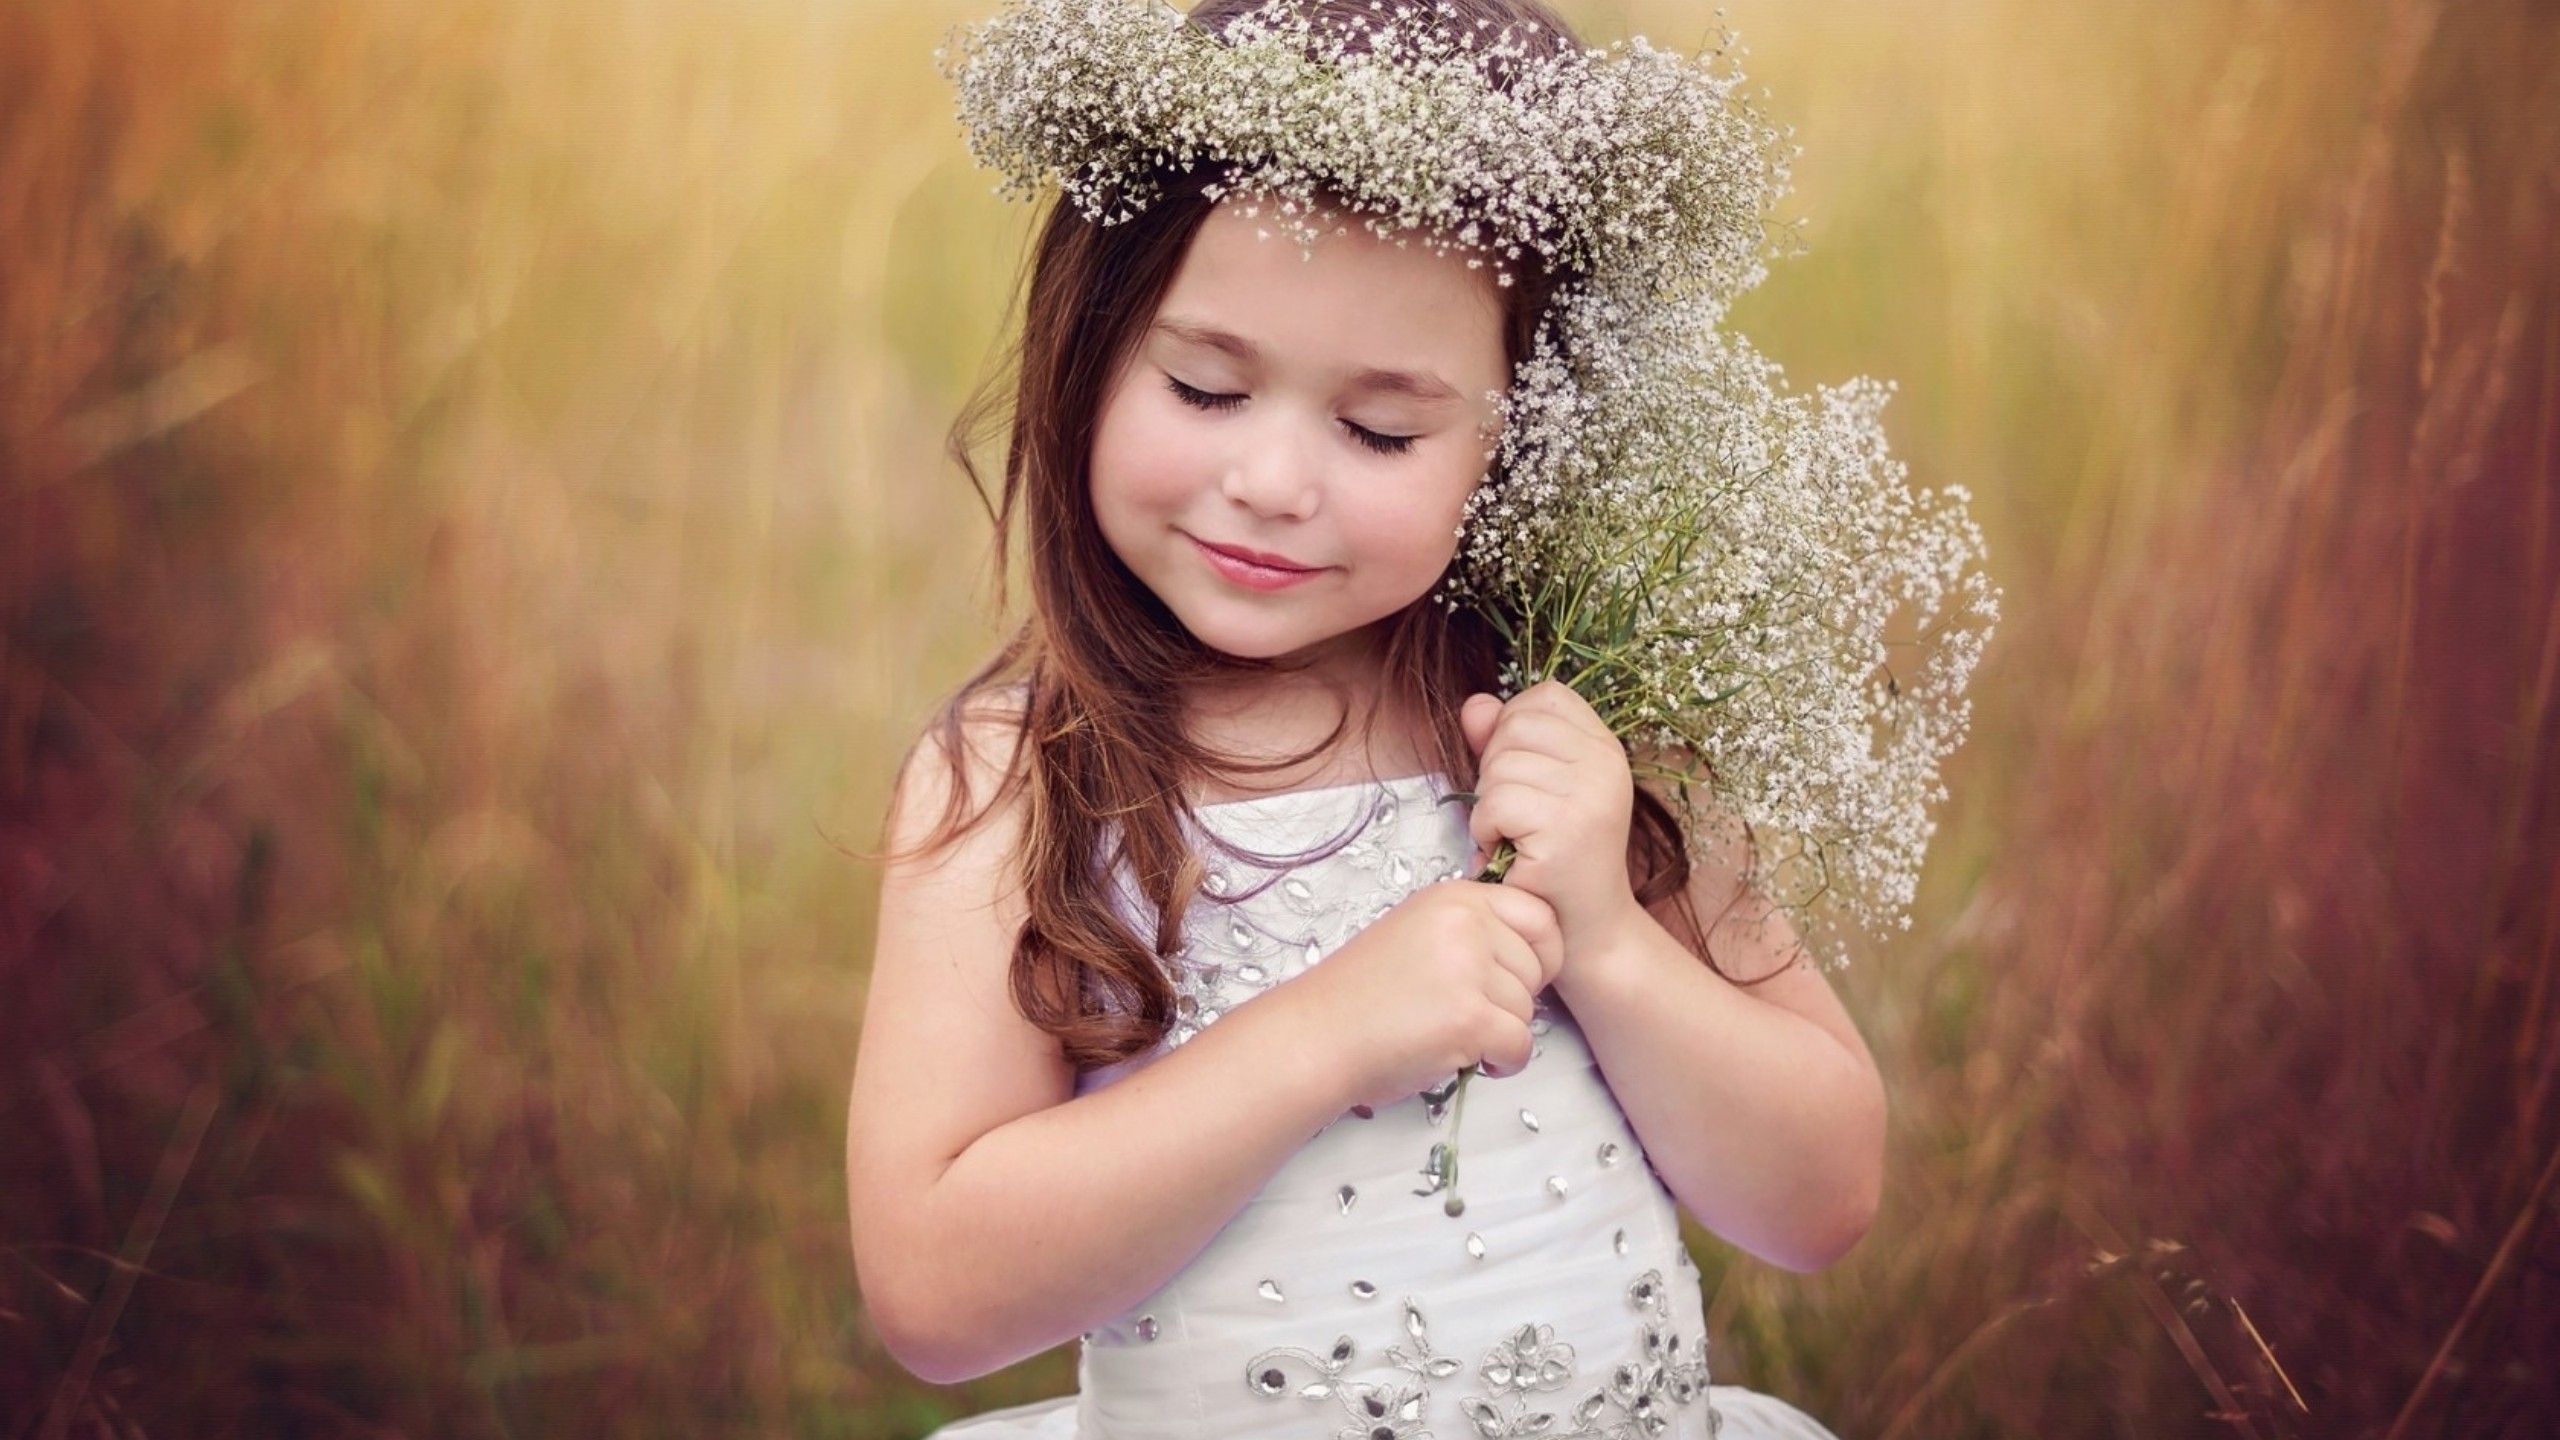 Baby Girls Wallpapers | Cute Baby Wallpapers